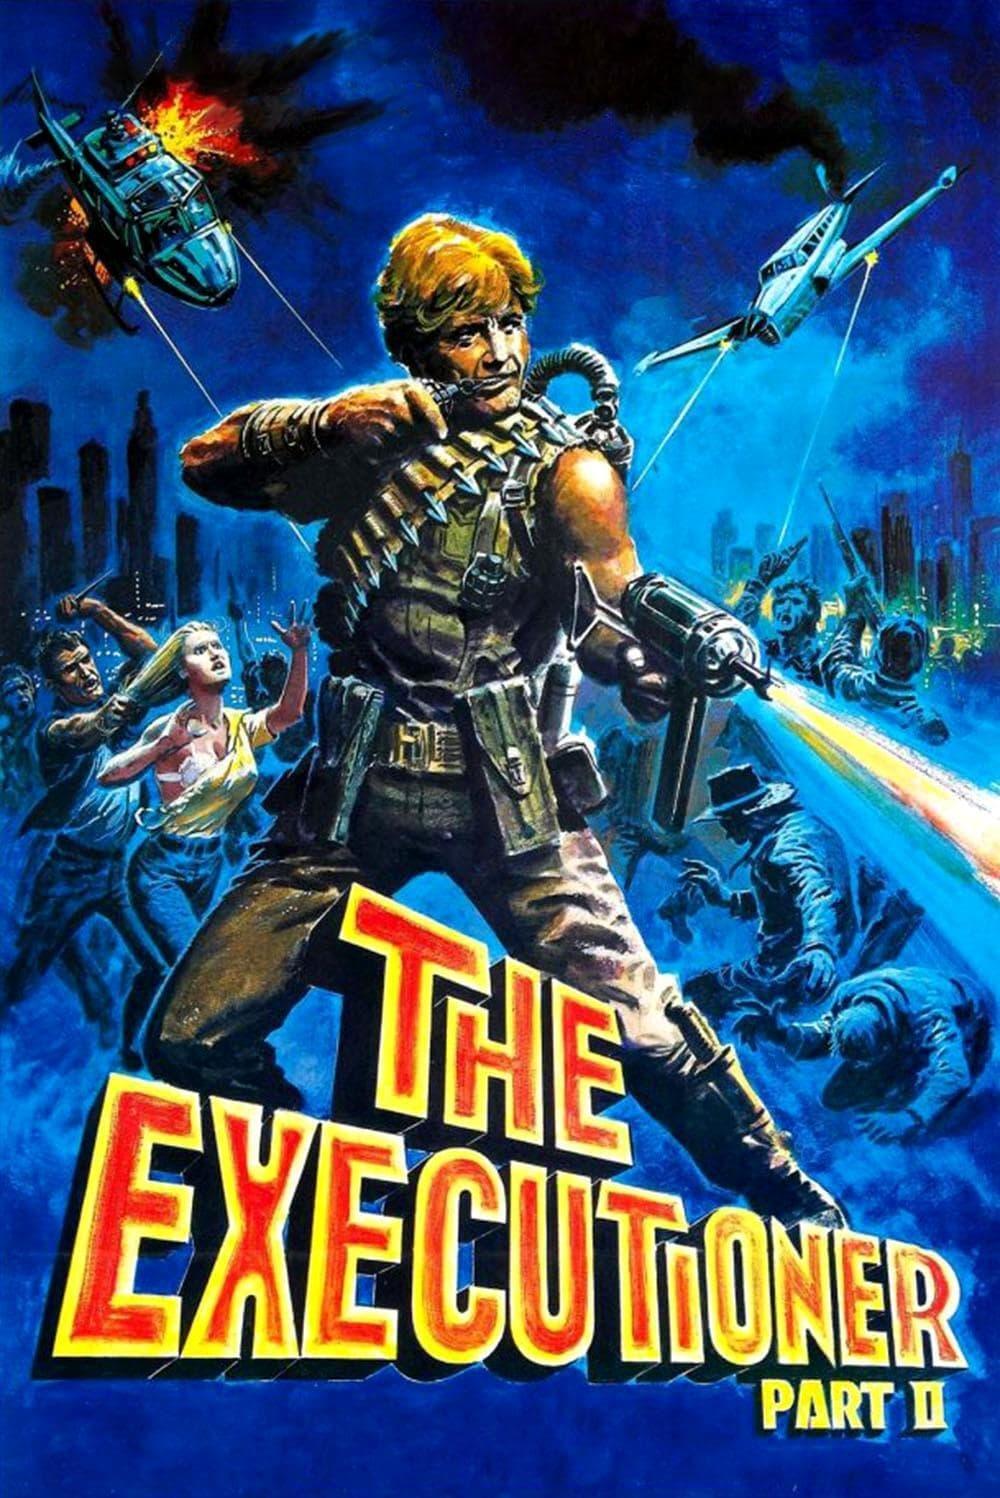 The Executioner Part II poster